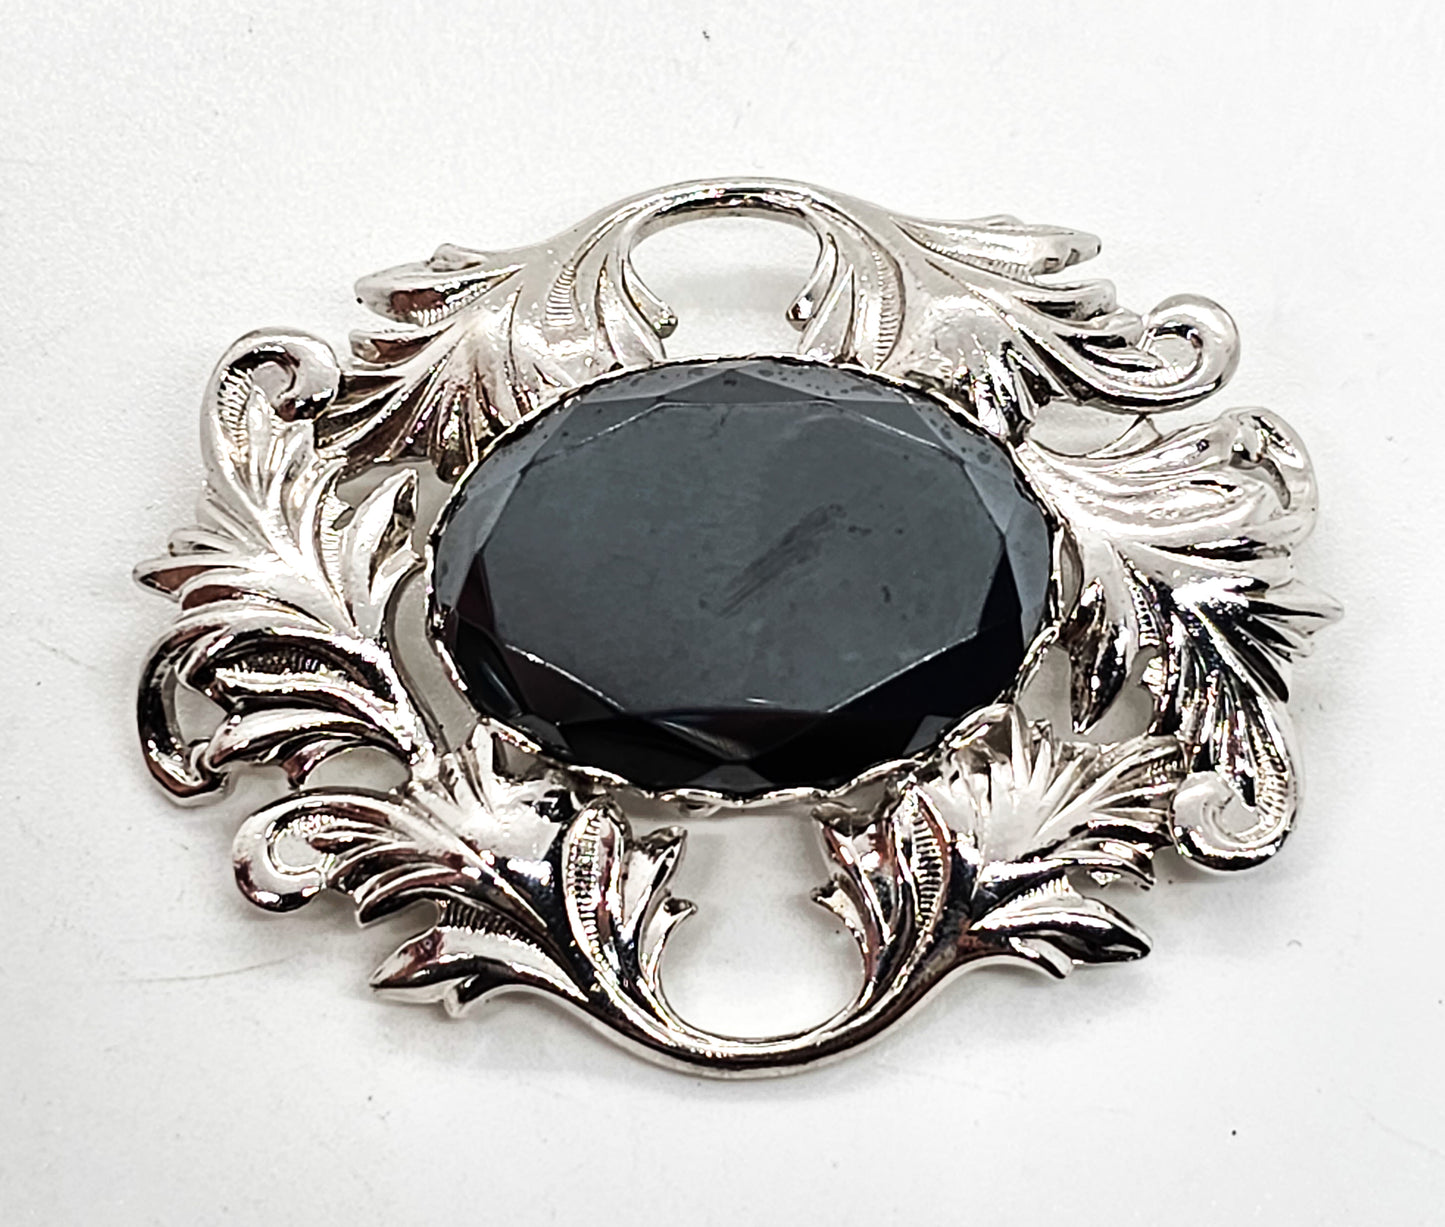 Hematite large faceted gray stone rhodium plated mid century vintage brooch